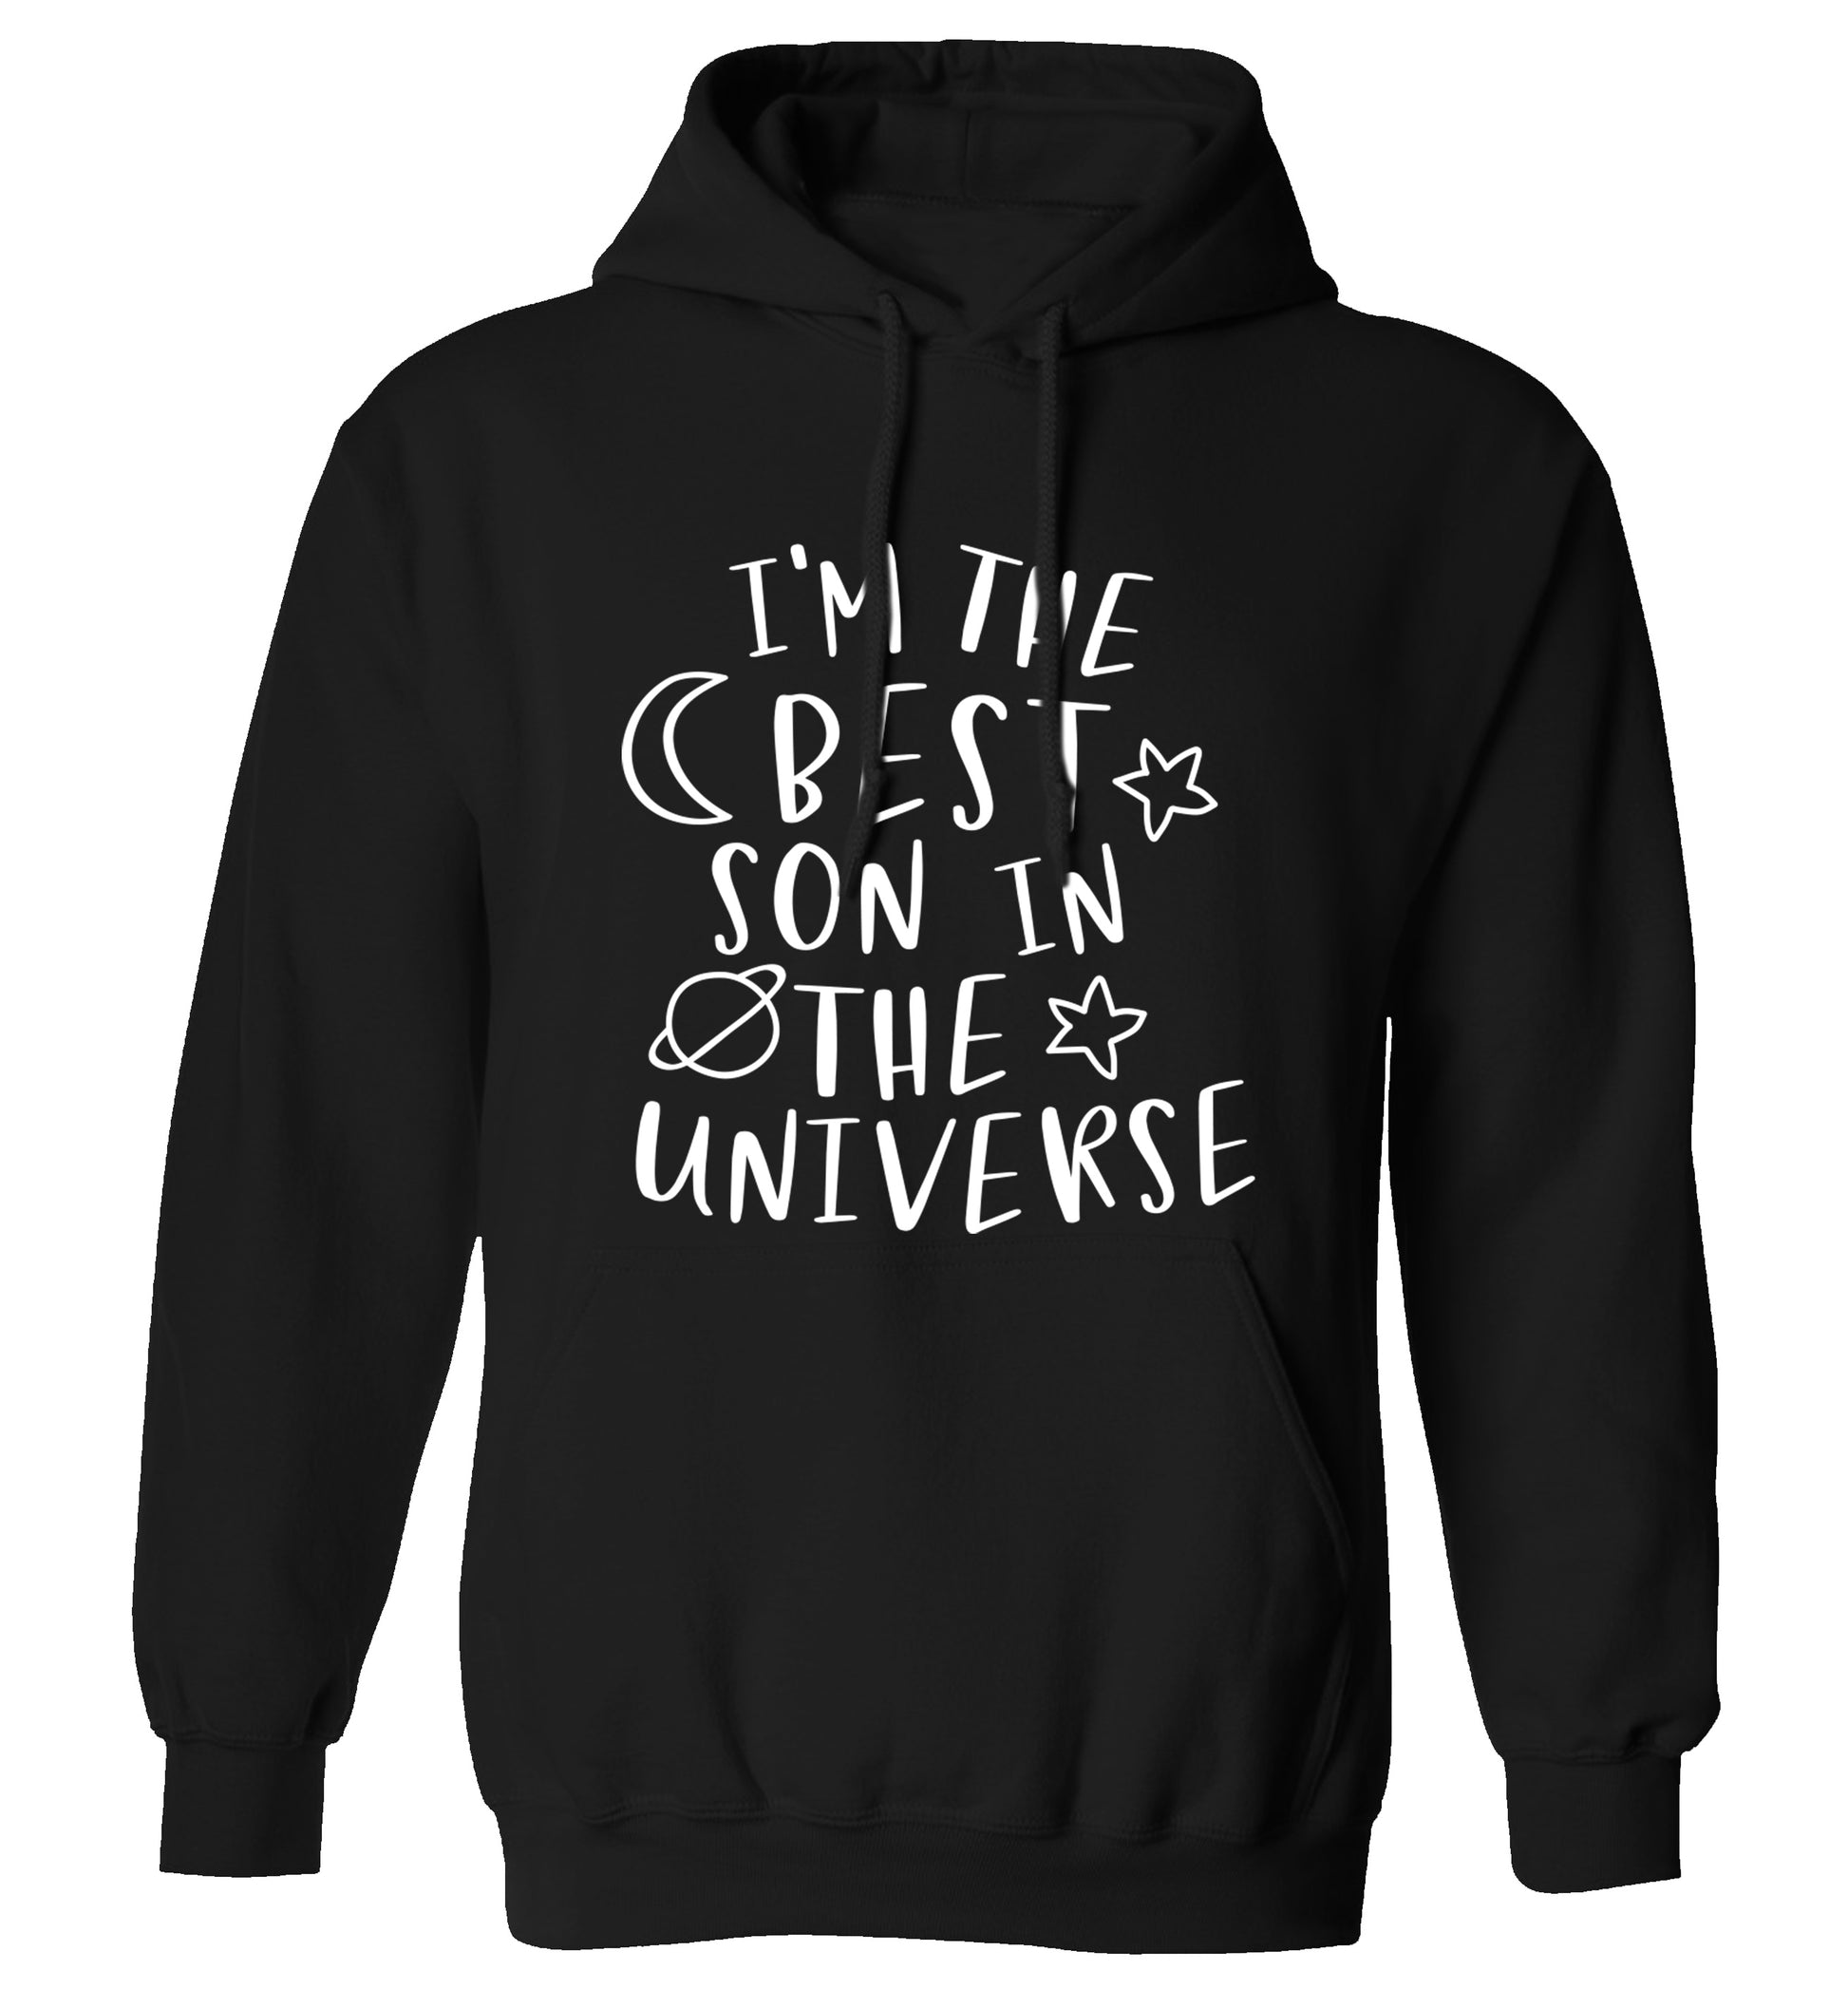 I'm the best son in the universe adults unisex black hoodie 2XL